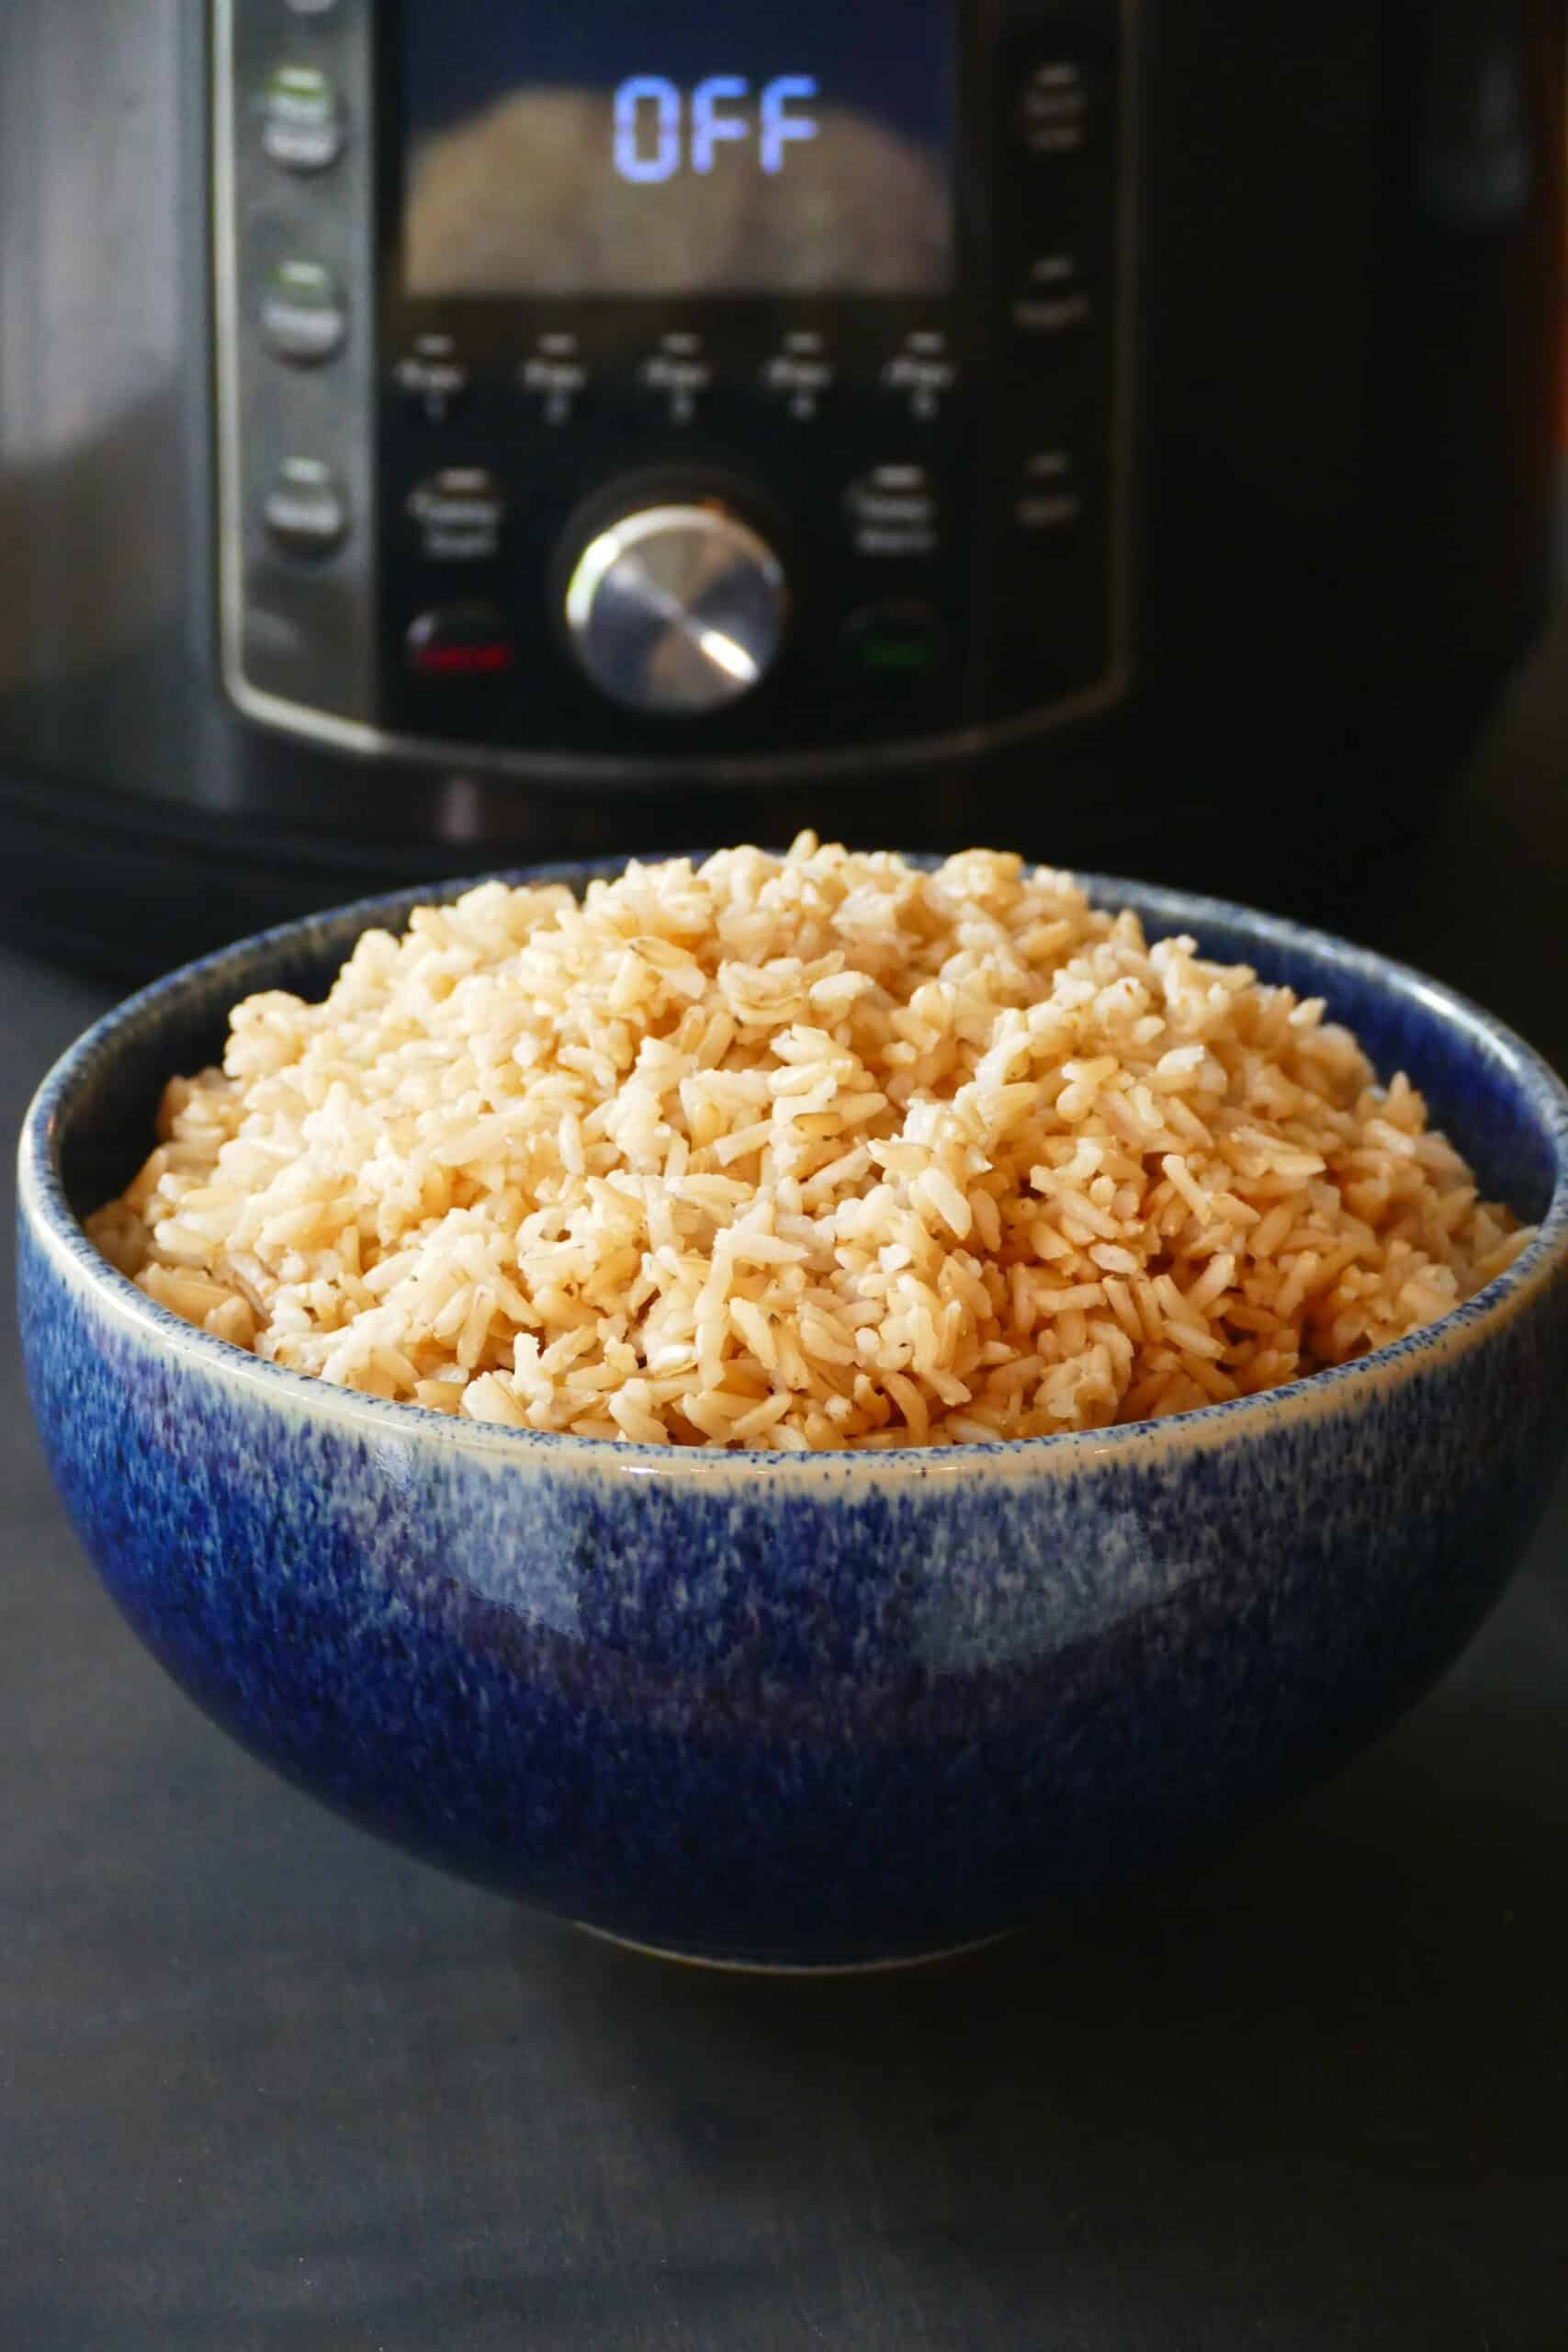 Instant Pot brown basmati rice in a a heaping mound in a blue bowl in front of a black Instant Pot.